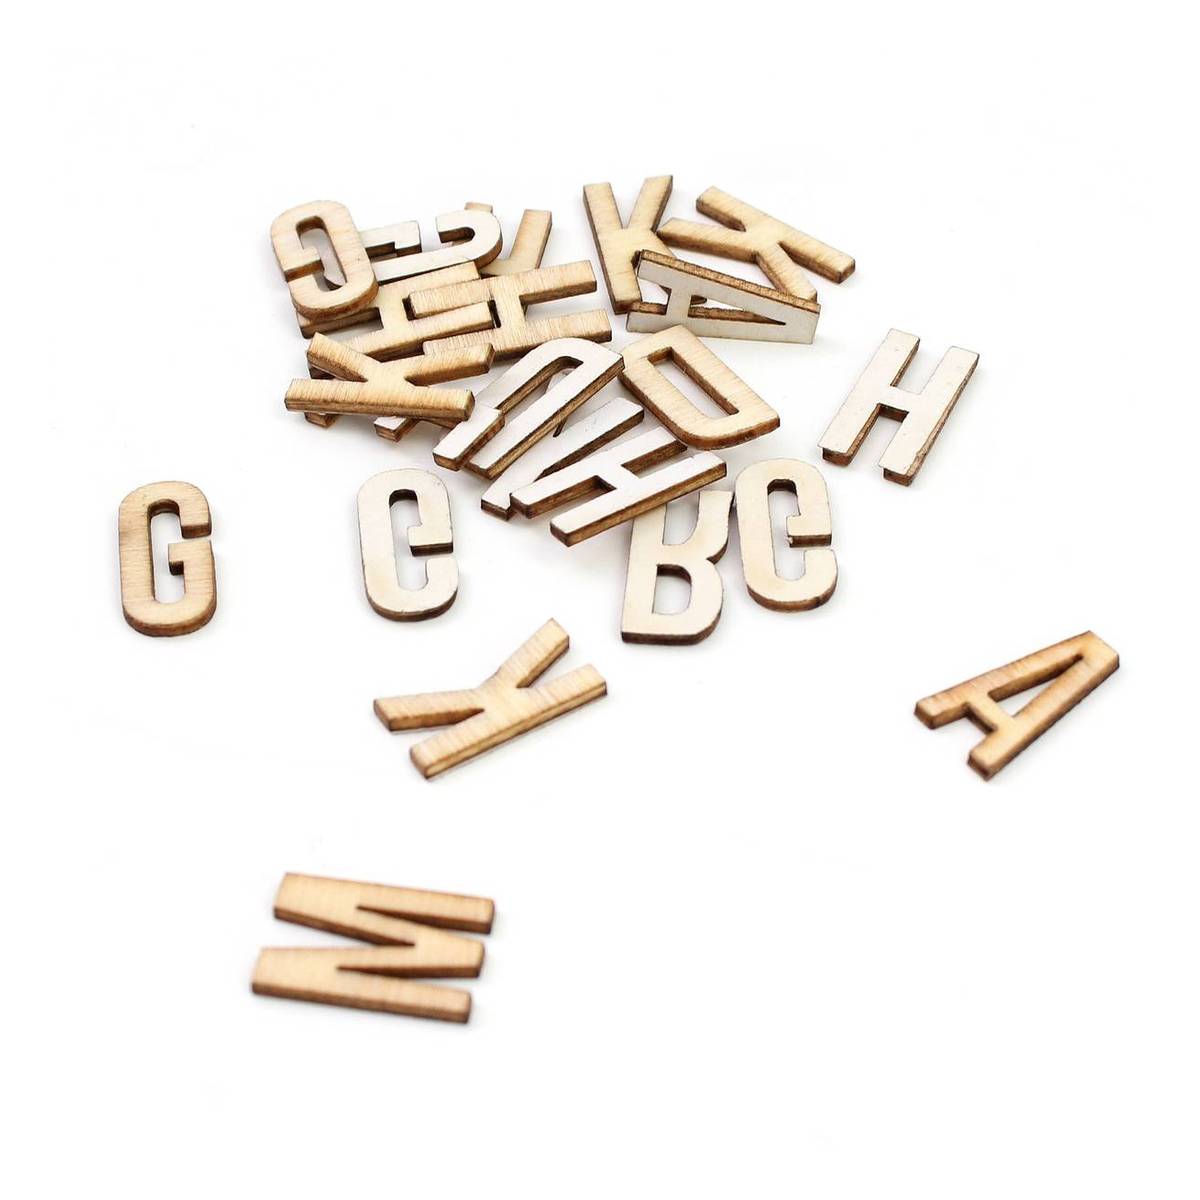 Bare Basics Adhesive Wooden Letters 200 Pack